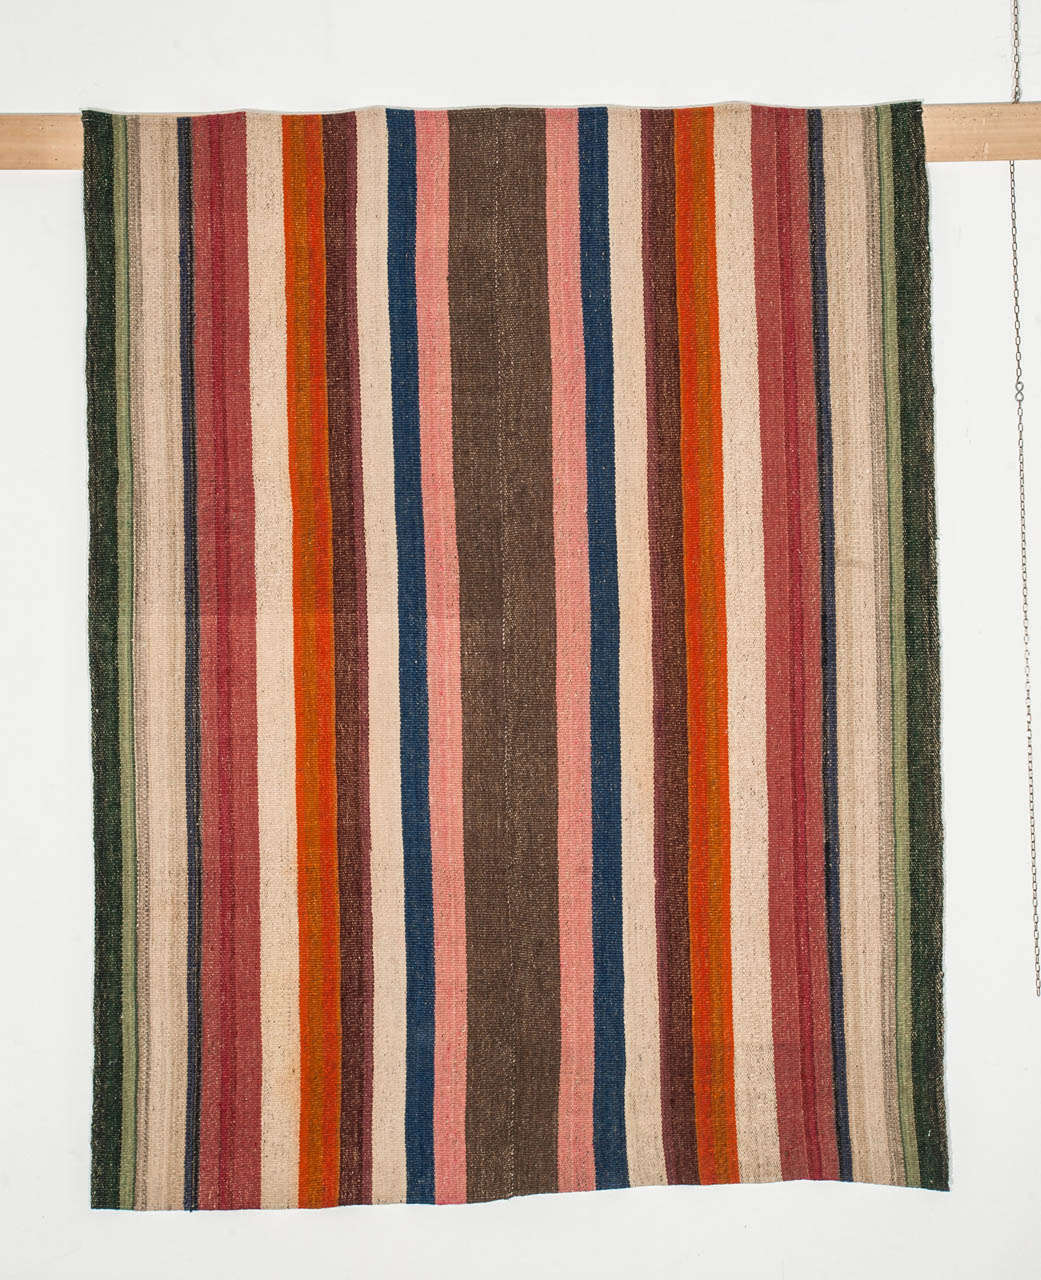 A colourful flat-weave composed of two panels joined together at the centre woven in the weft-substitution technique, also known as Jajim. These flatweaves were used in the tents of the Qashqa'i nomadic tribes located in southern Persia. The